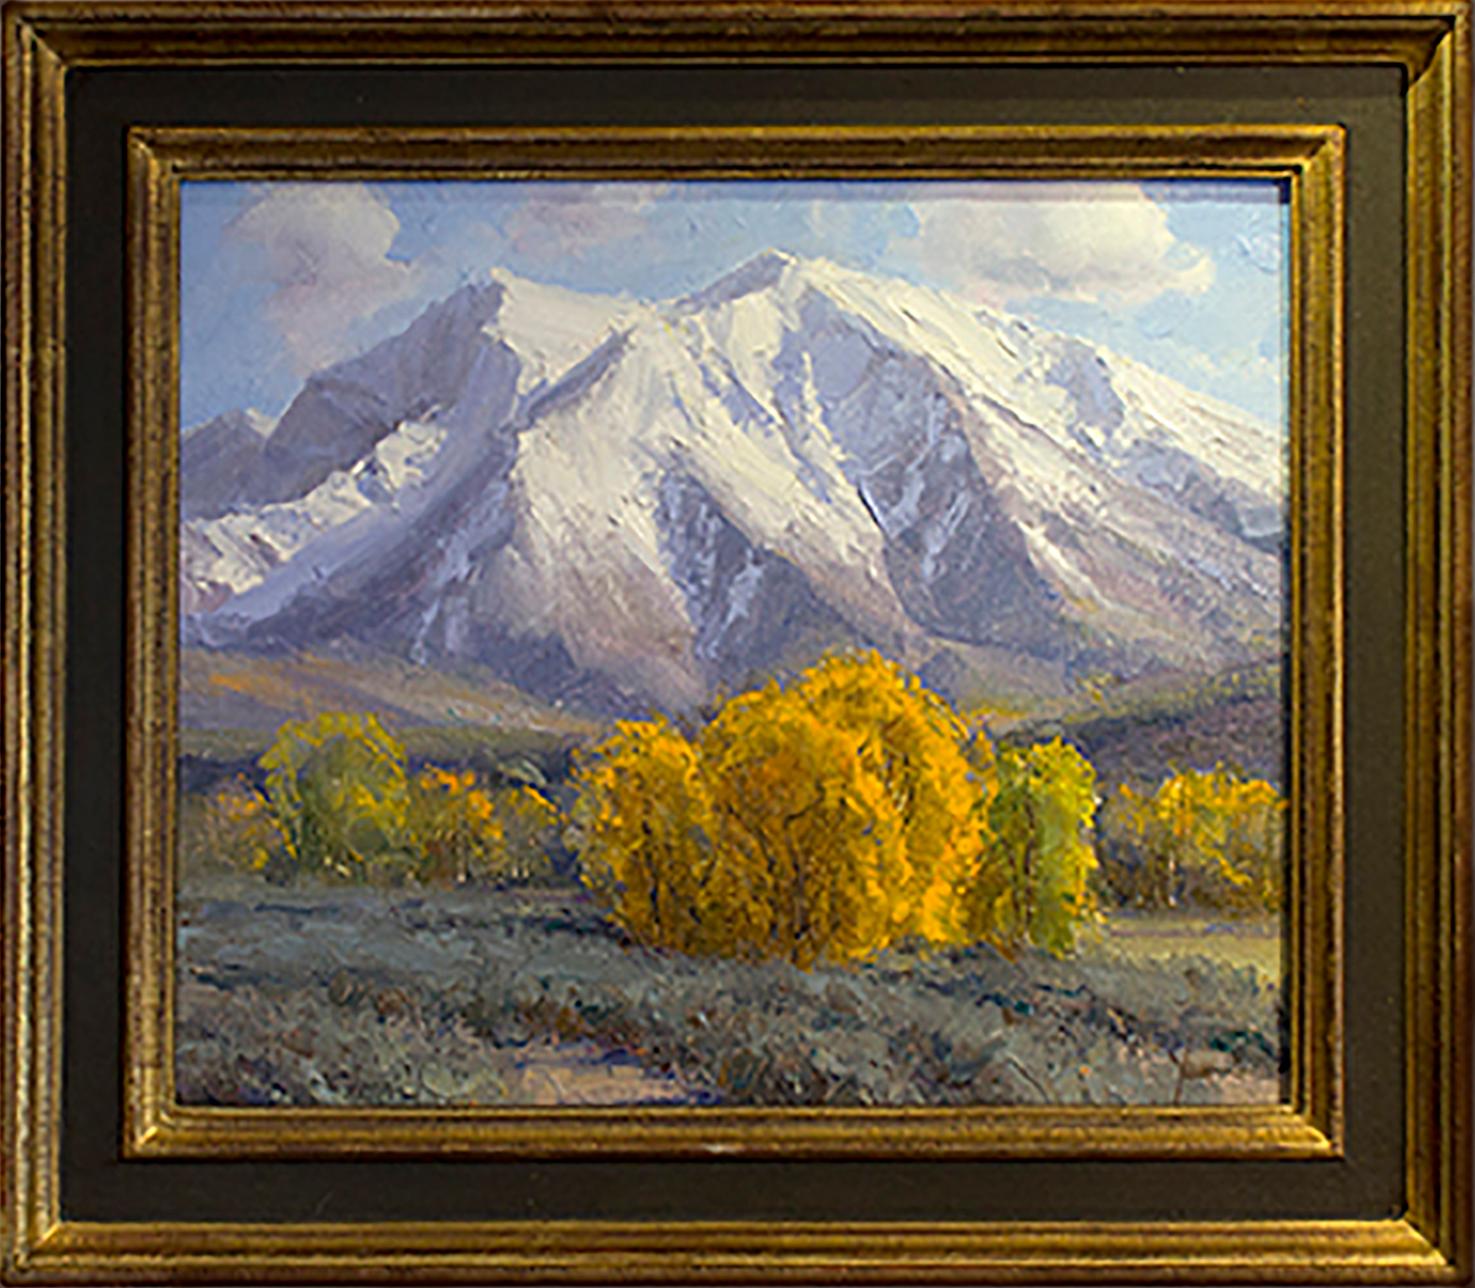 King of the Valley (Mt Sopris, Fall, 1st snow) - Painting by Dan Young